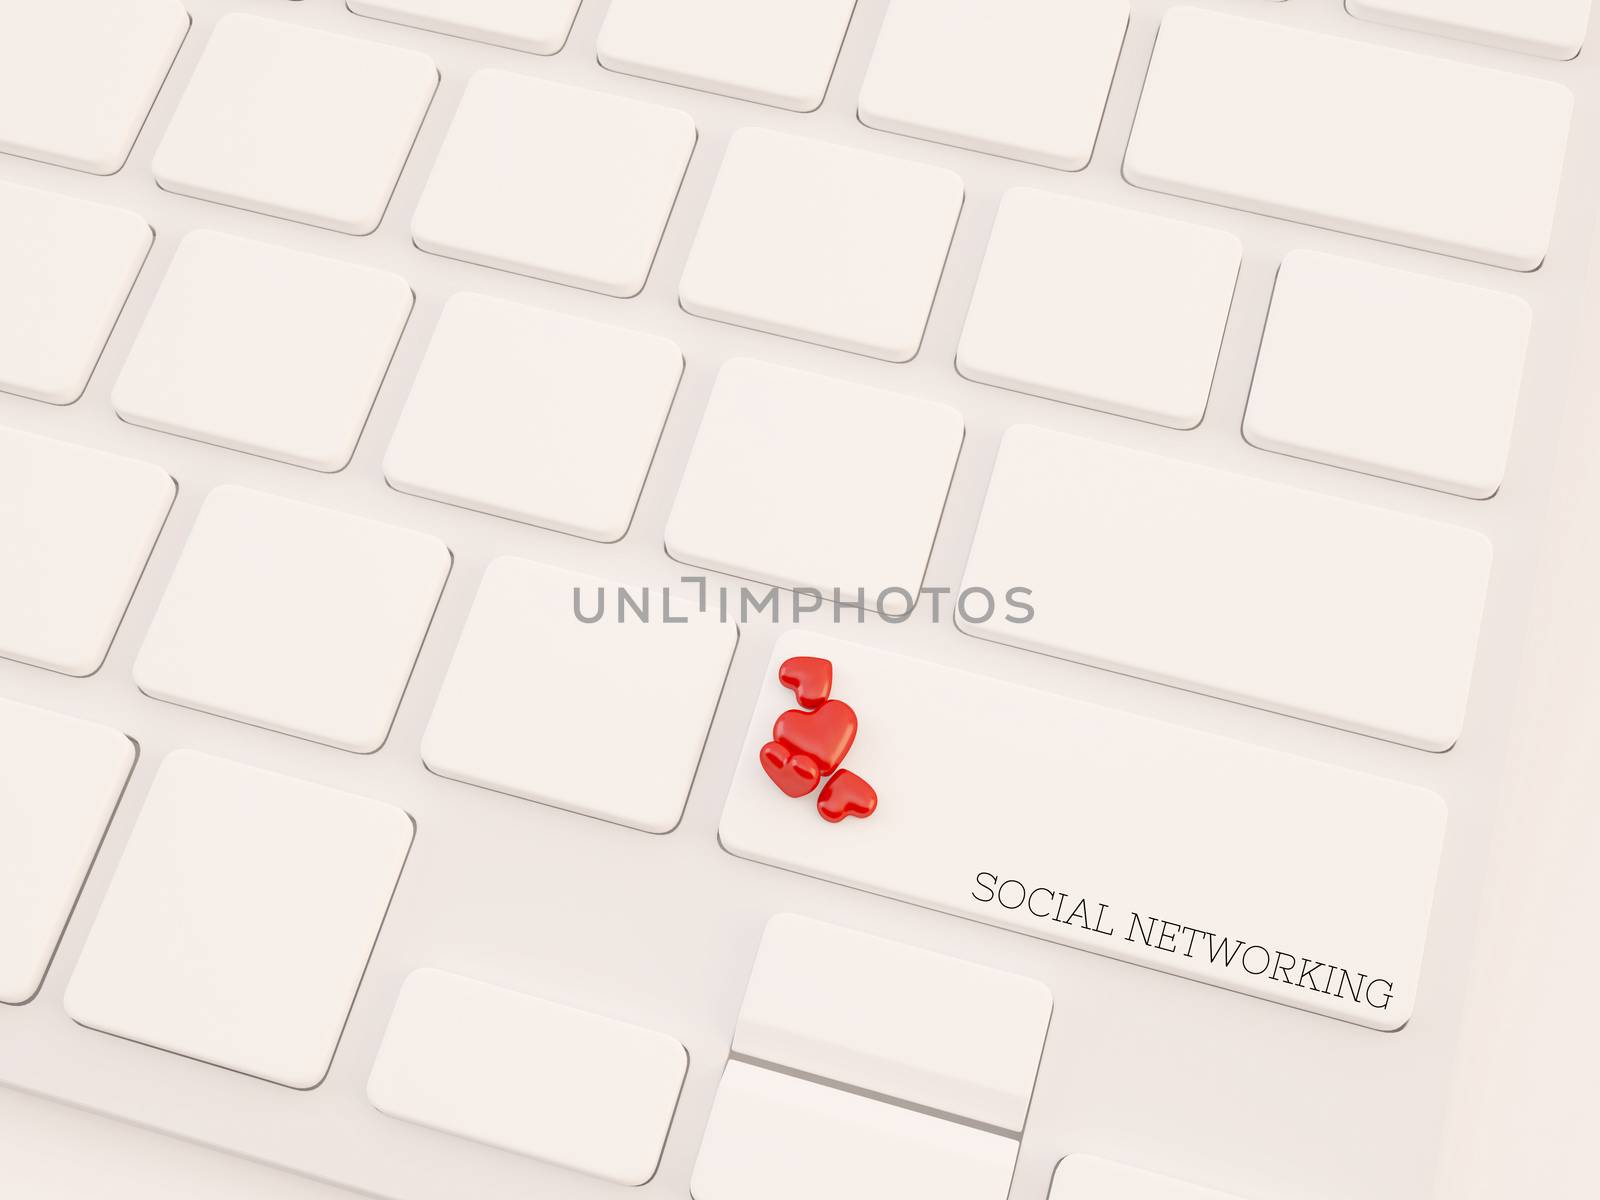 social networking key with hearts on computer